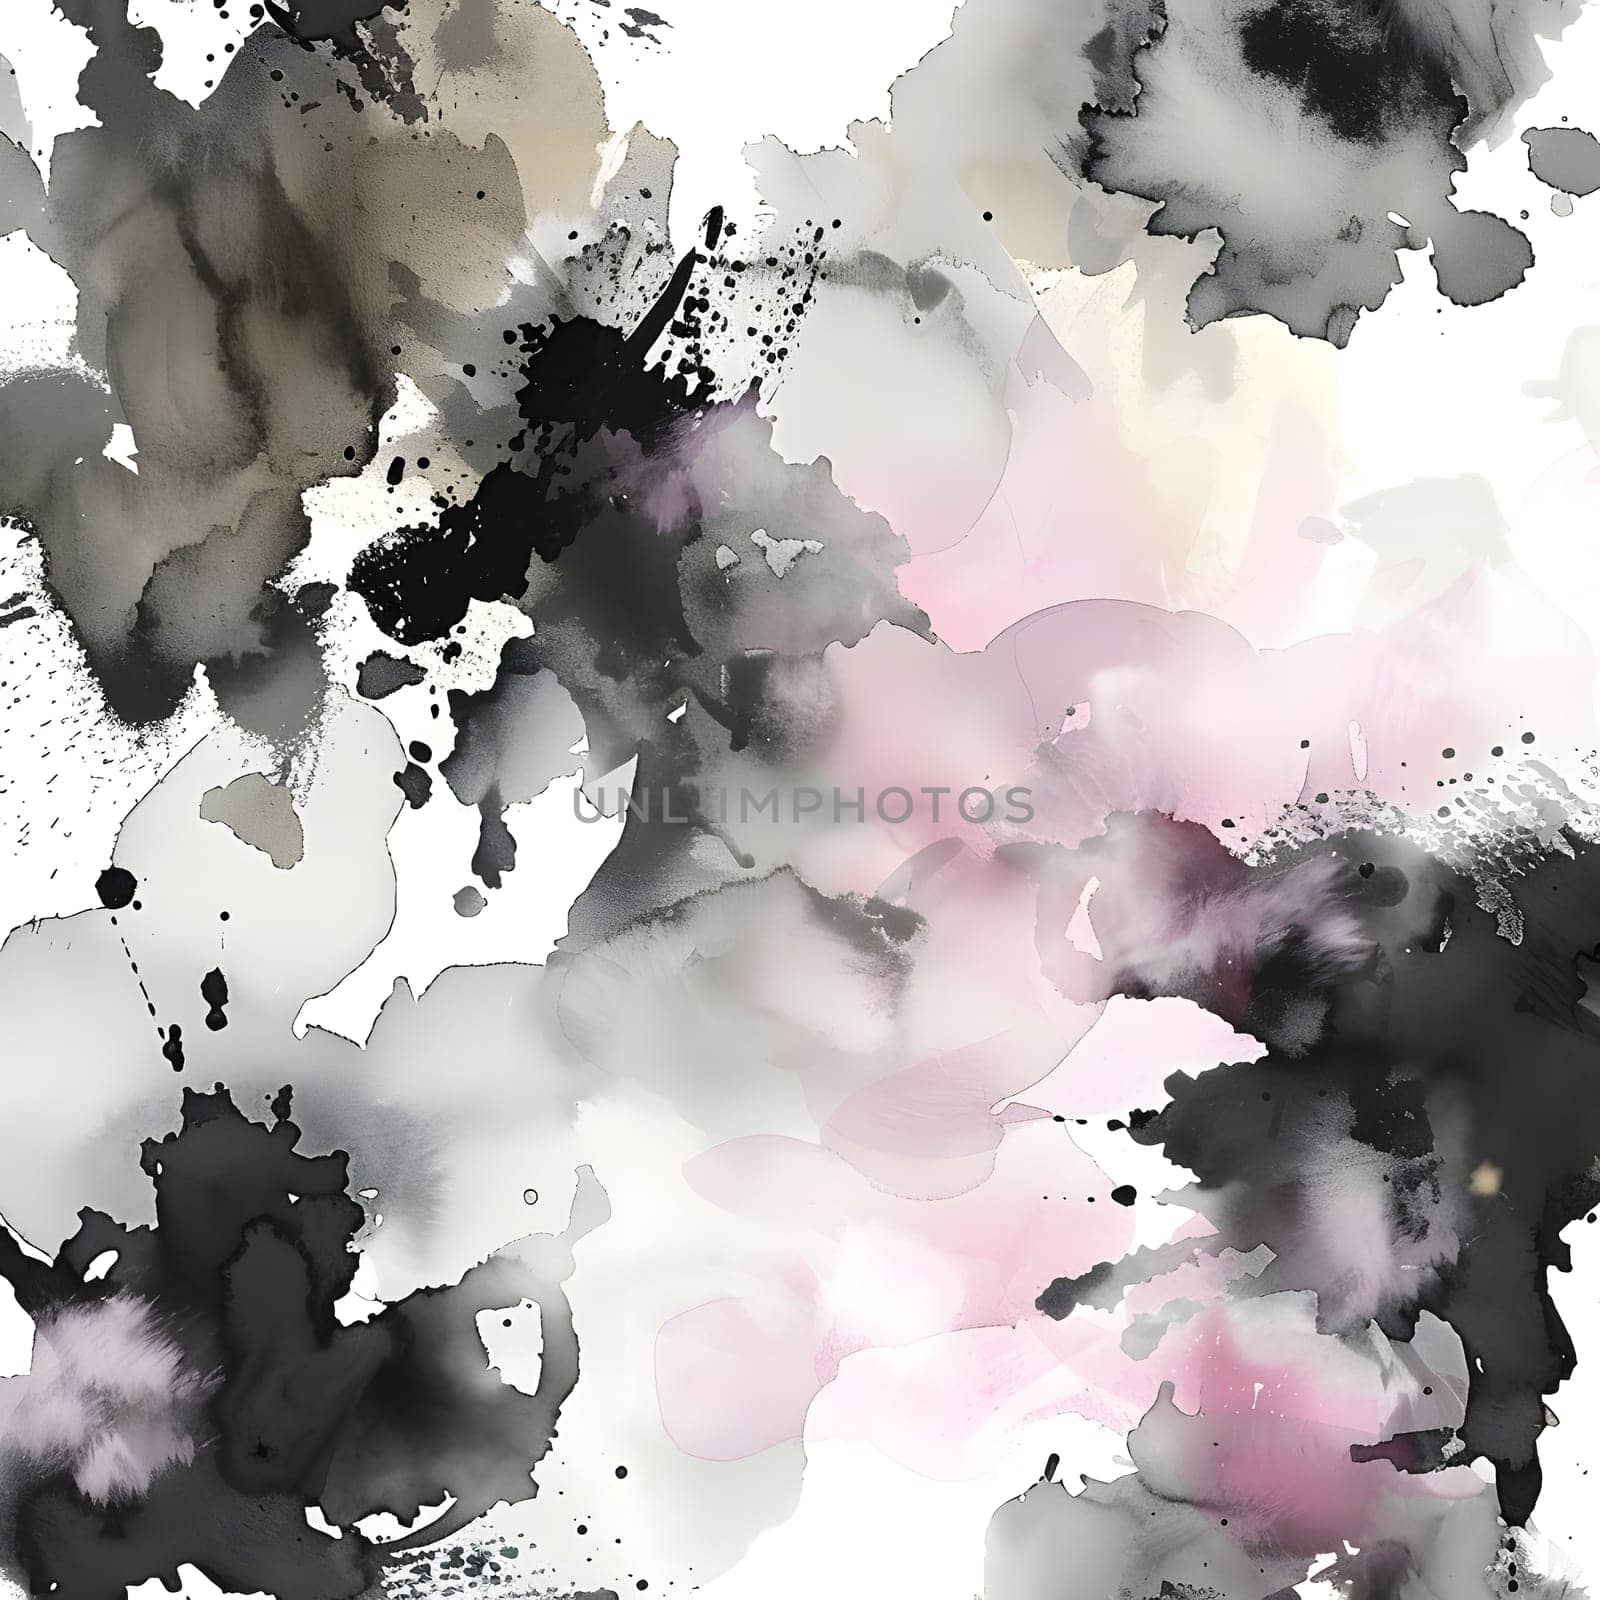 a black , white and pink watercolor painting on a white background by Nadtochiy